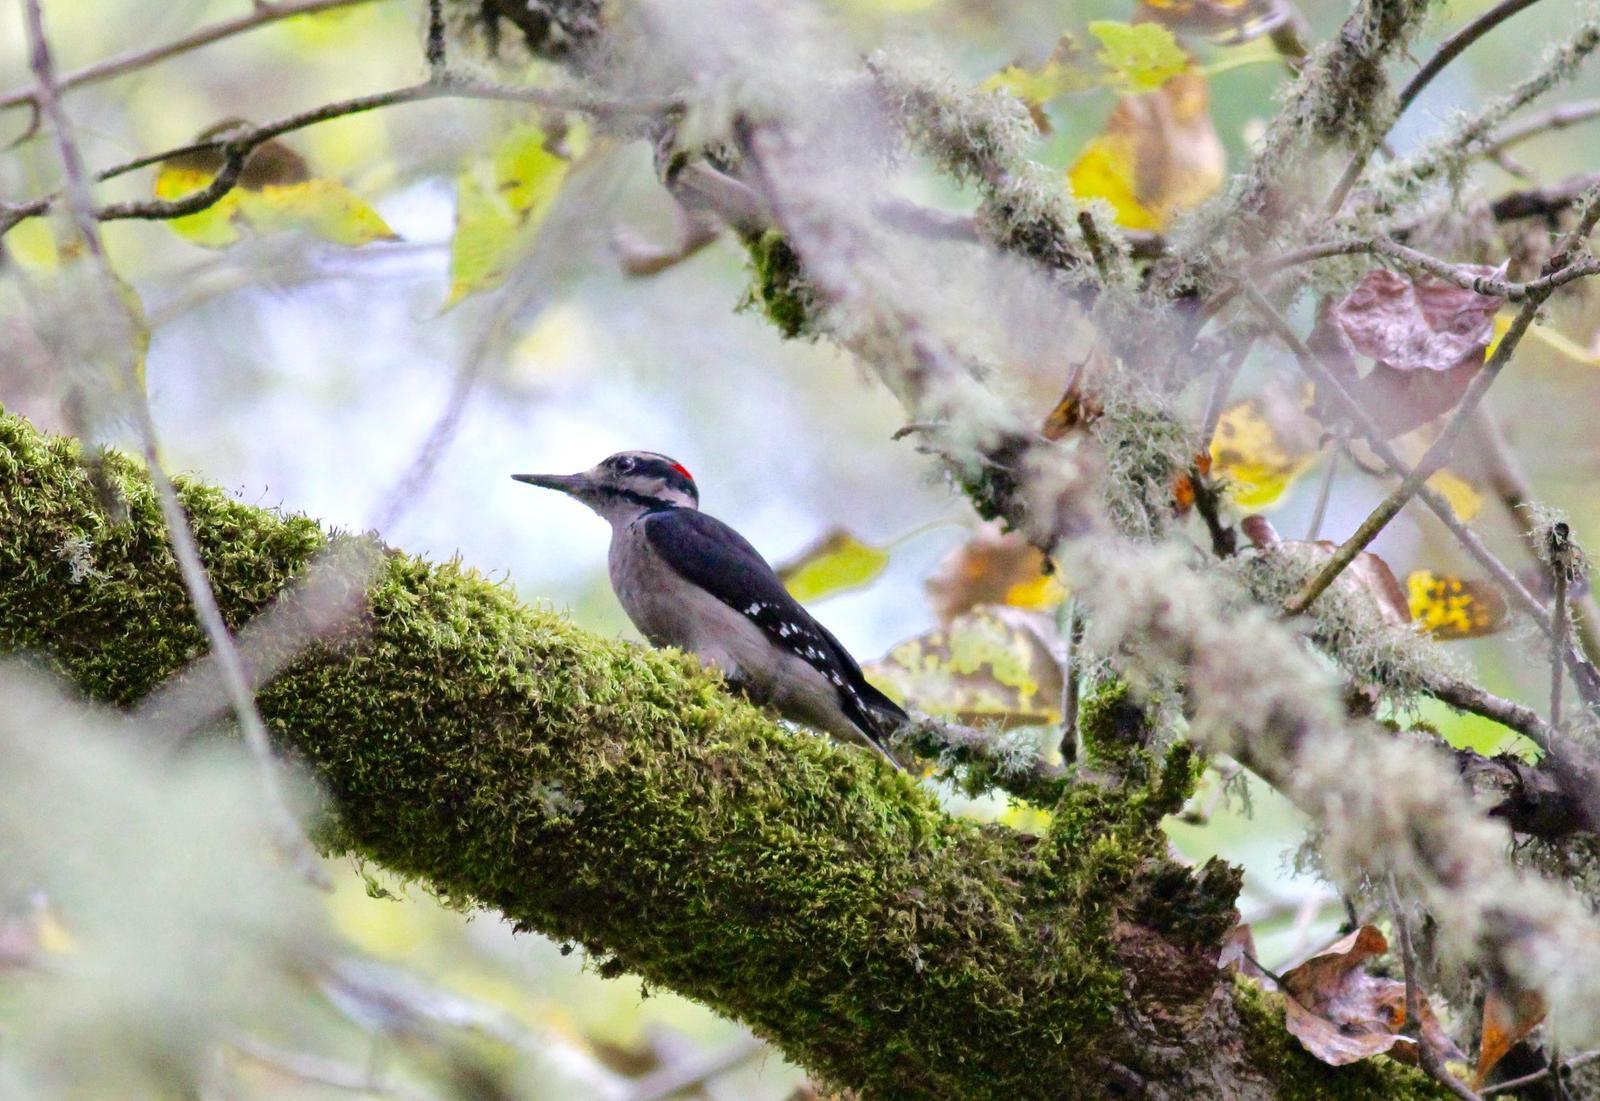 Hairy Woodpecker Photo by Kathryn Keith